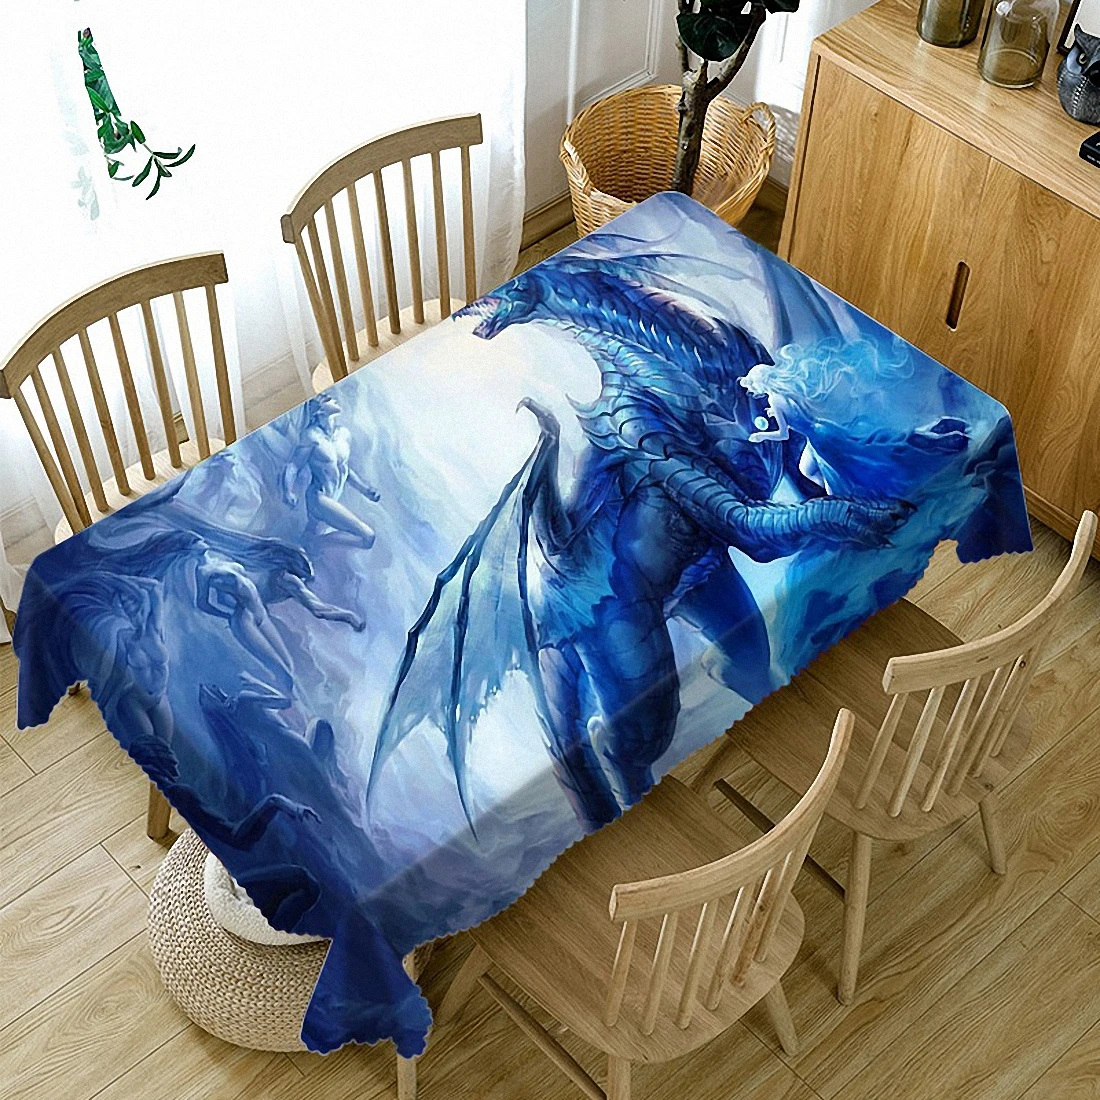 

Dragon High quality super three-dimensional 3D rural tablecloth bedside cabinet cover cloth tapestry banners flag wall decor